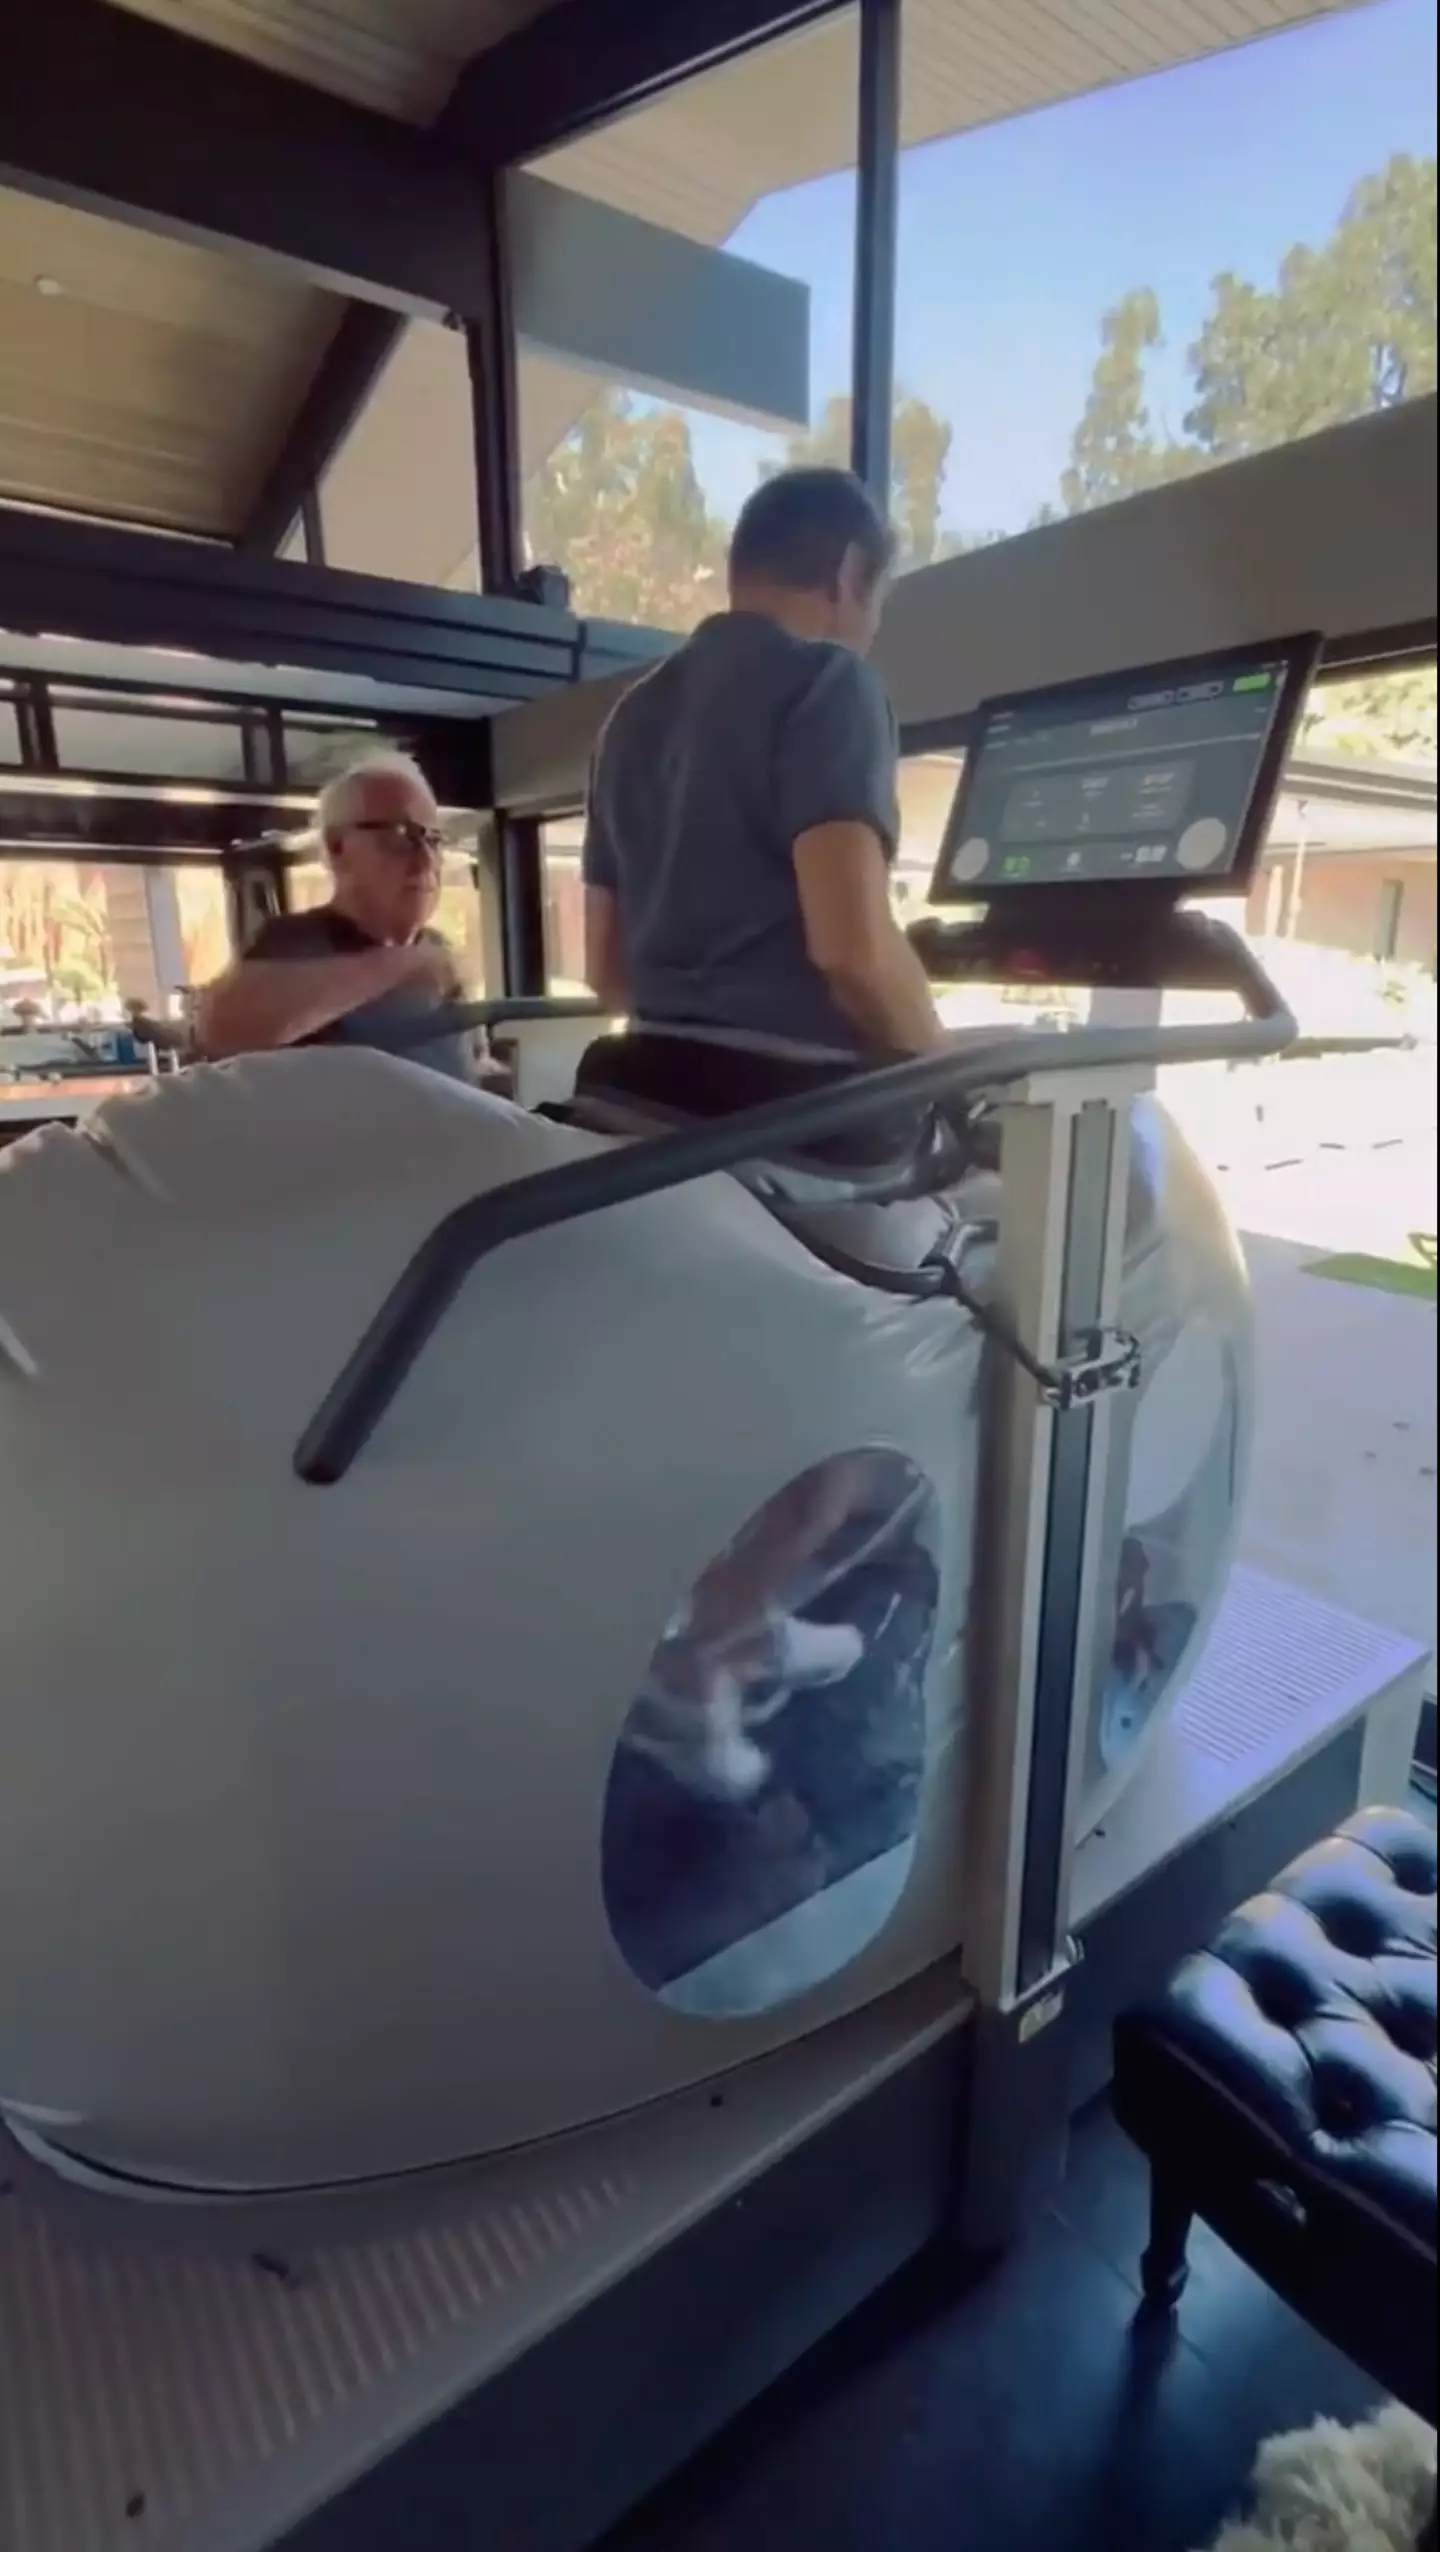 Jeremy Renner shared the video of himself walking on a treadmill.